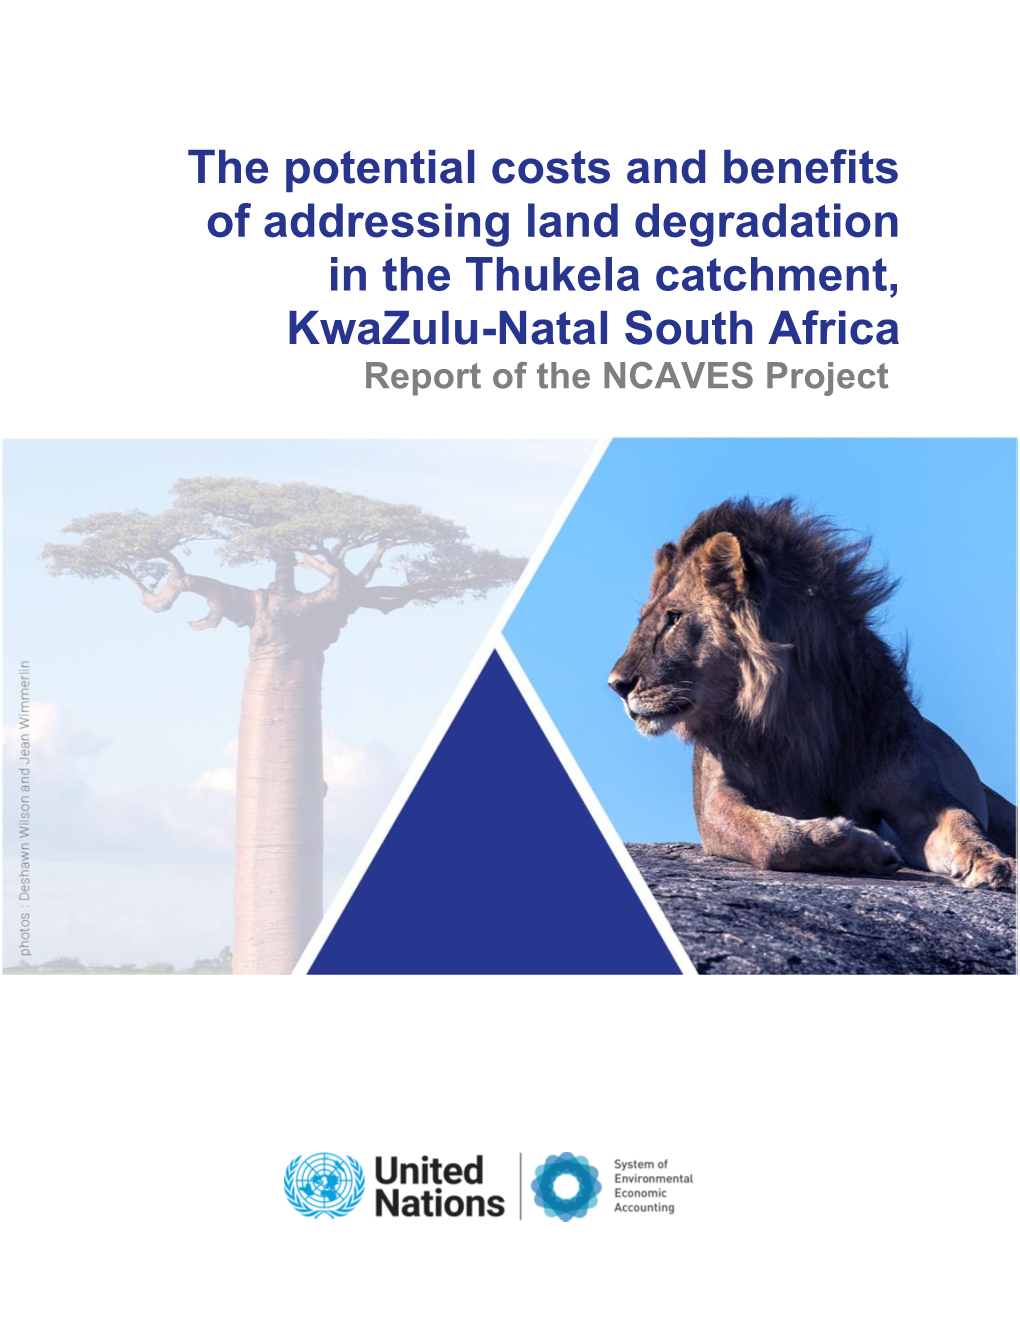 The Potential Costs and Benefits of Addressing Land Degradation in the Thukela Catchment, Kwazulu-Natal South Africa Report of the NCAVES Project